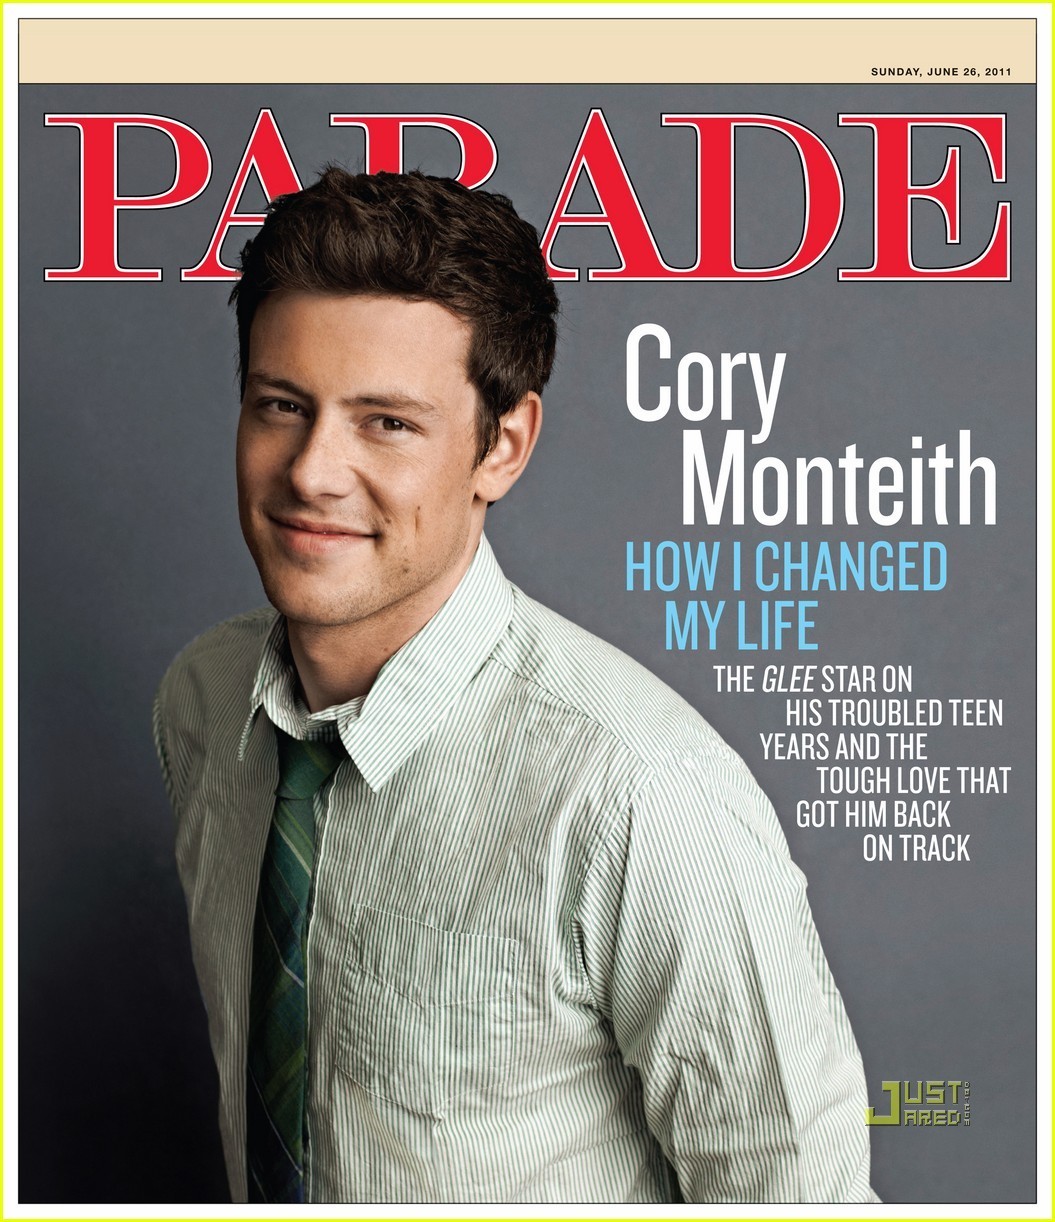 Cory Monteith - Photo Colection